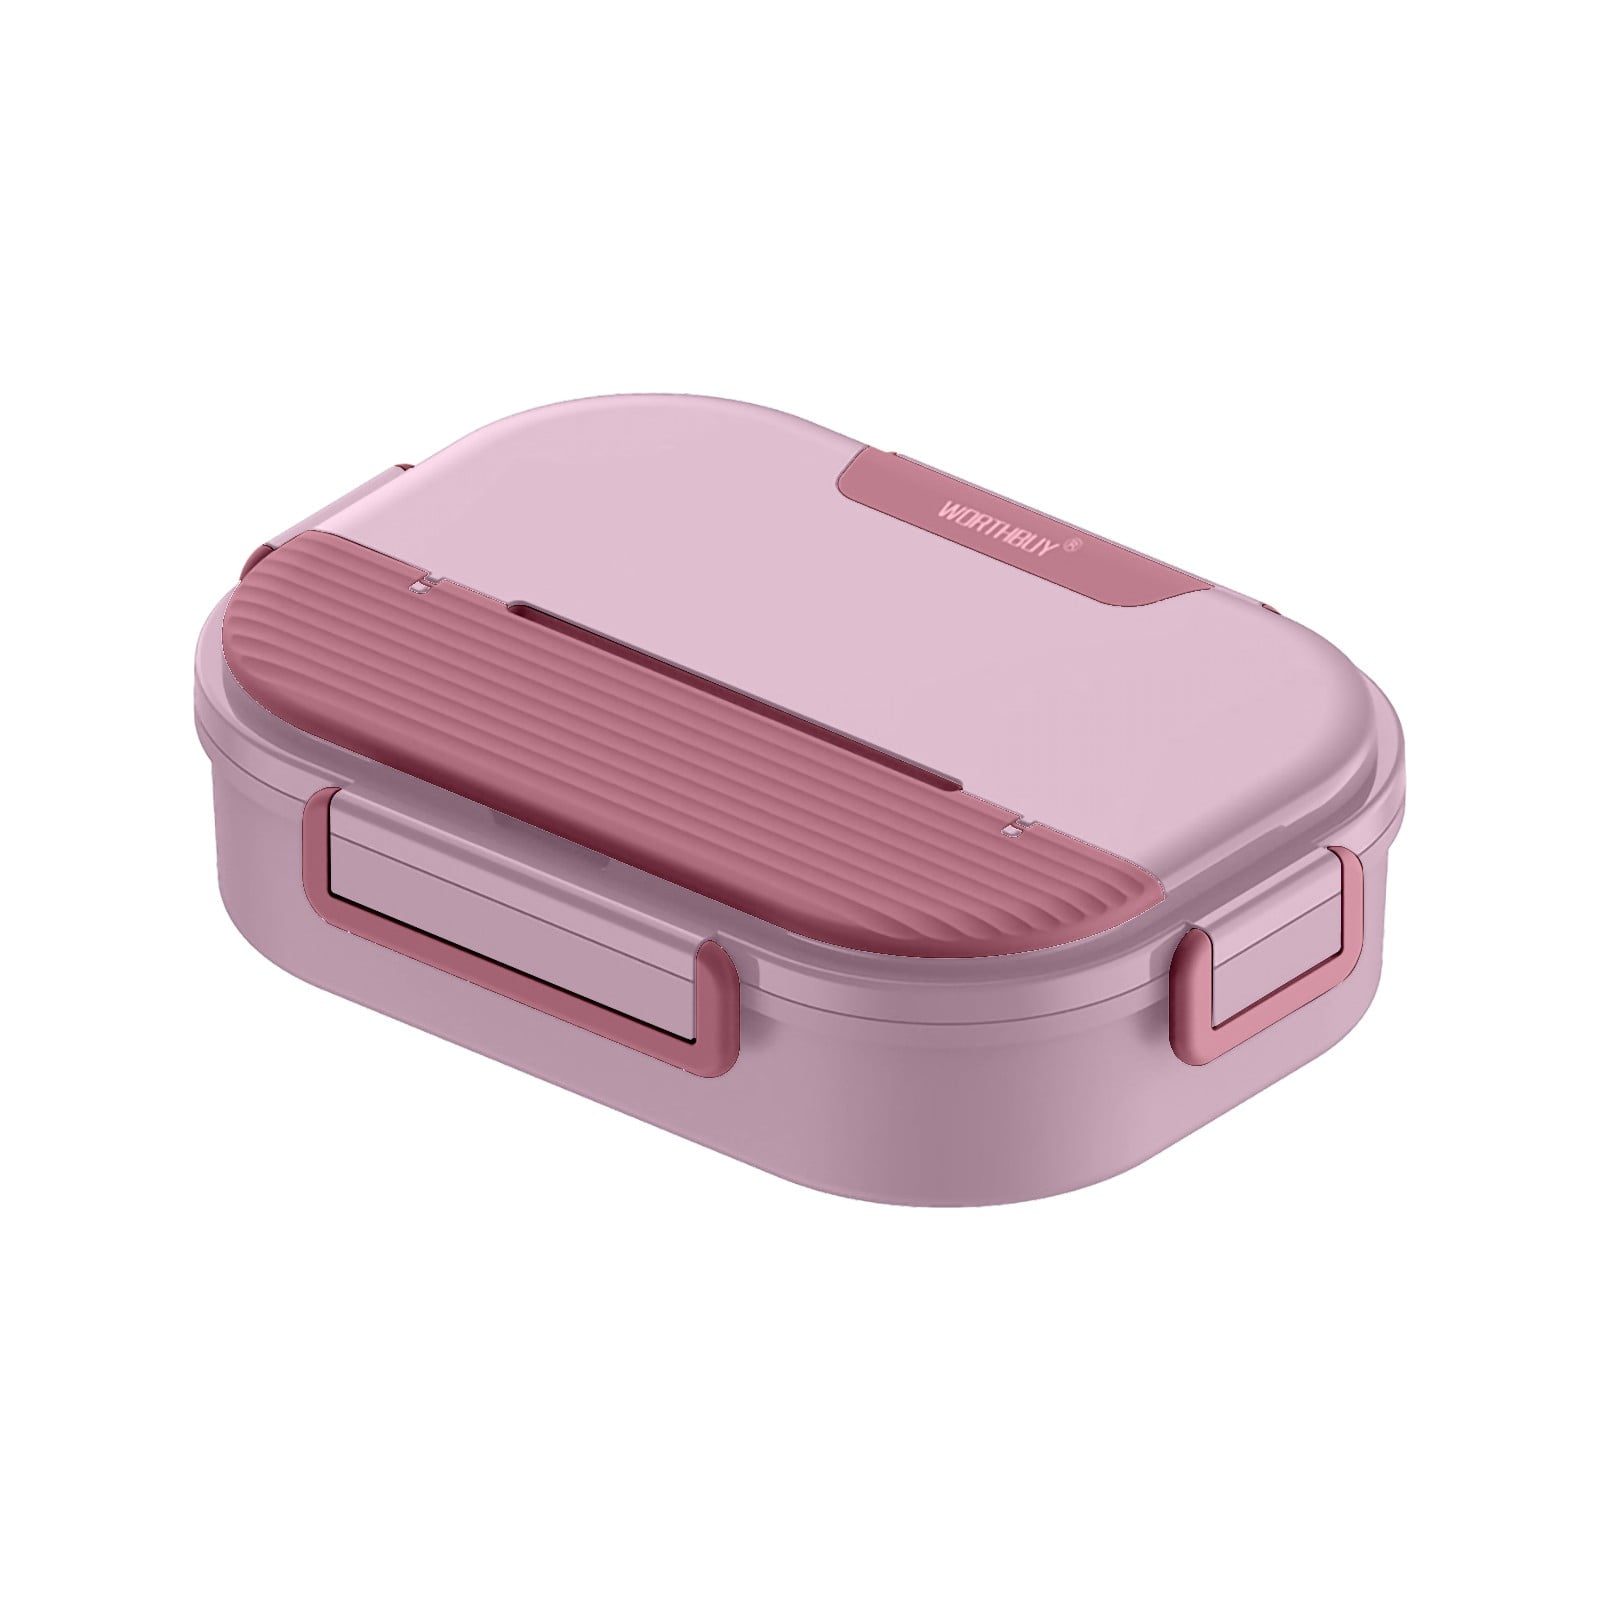 XMMSWDLA Luncheaze Lunch Box Pink Lunch Boxbento Boxes for Adults - Bento  Box for Kids - Leakproof Microwave Safe Bento Lunch Box Set with Cutlery Lunch  Box Snacks 